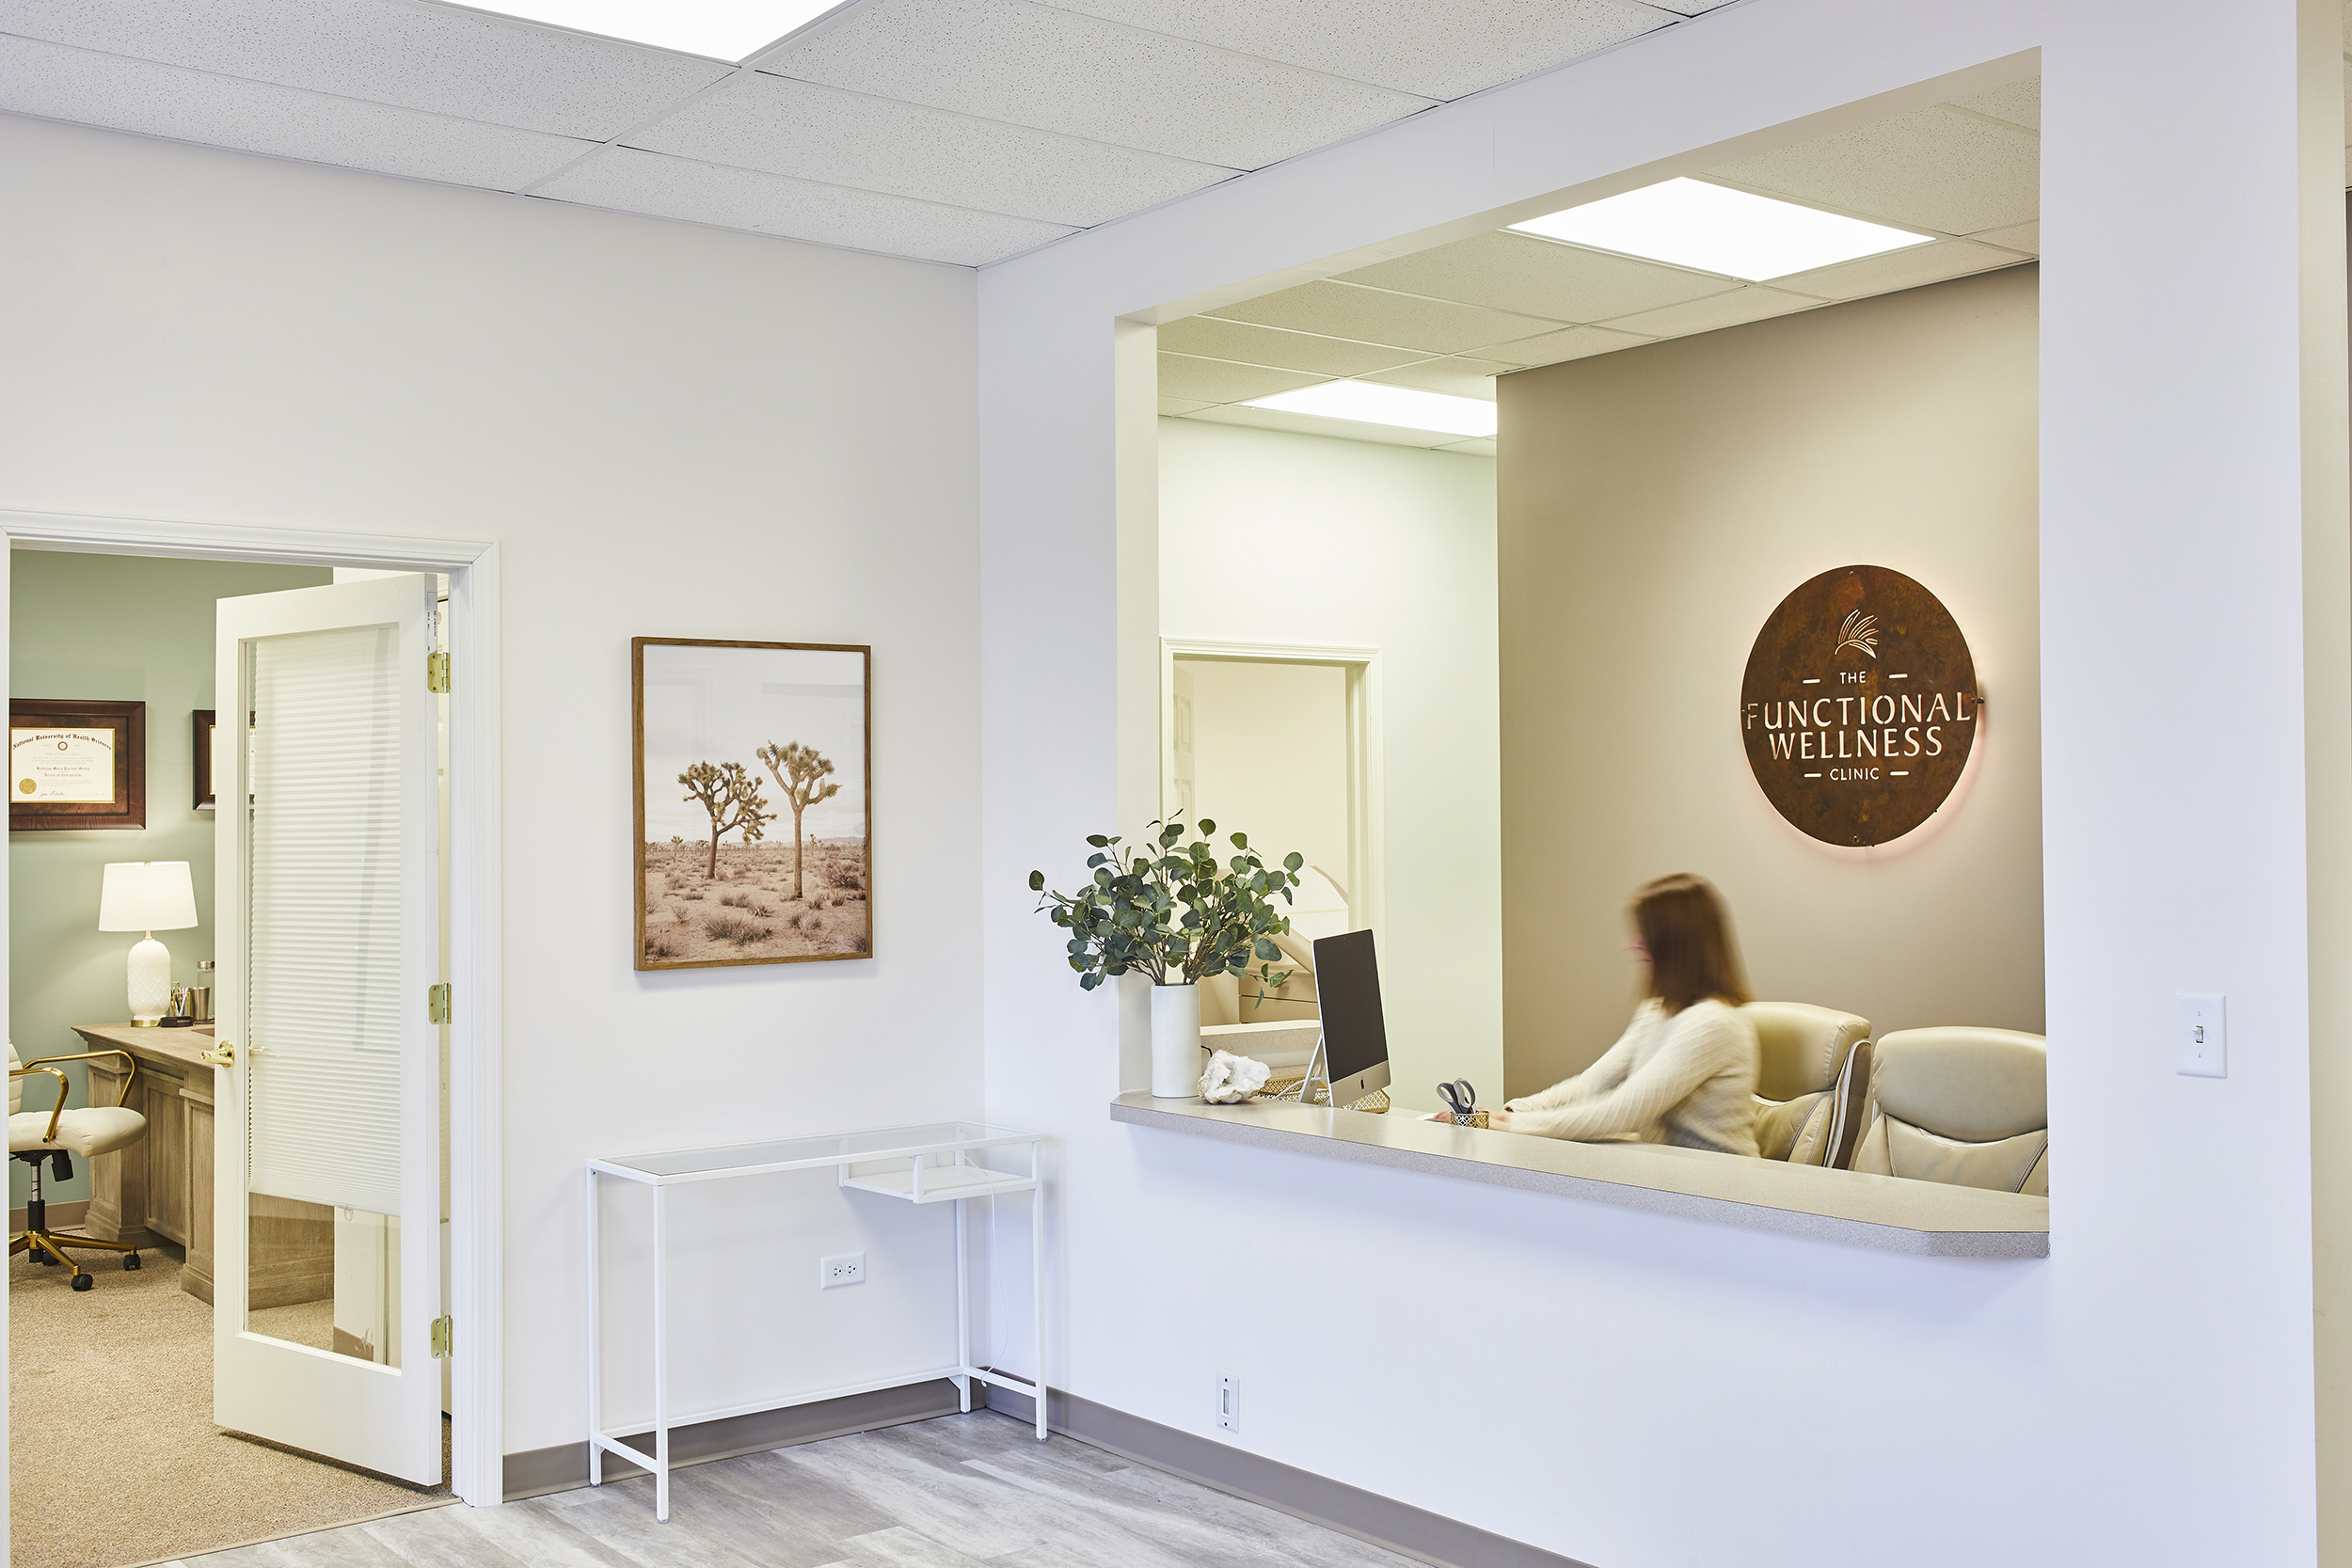 Take a look inside The Functional Wellness Clinic